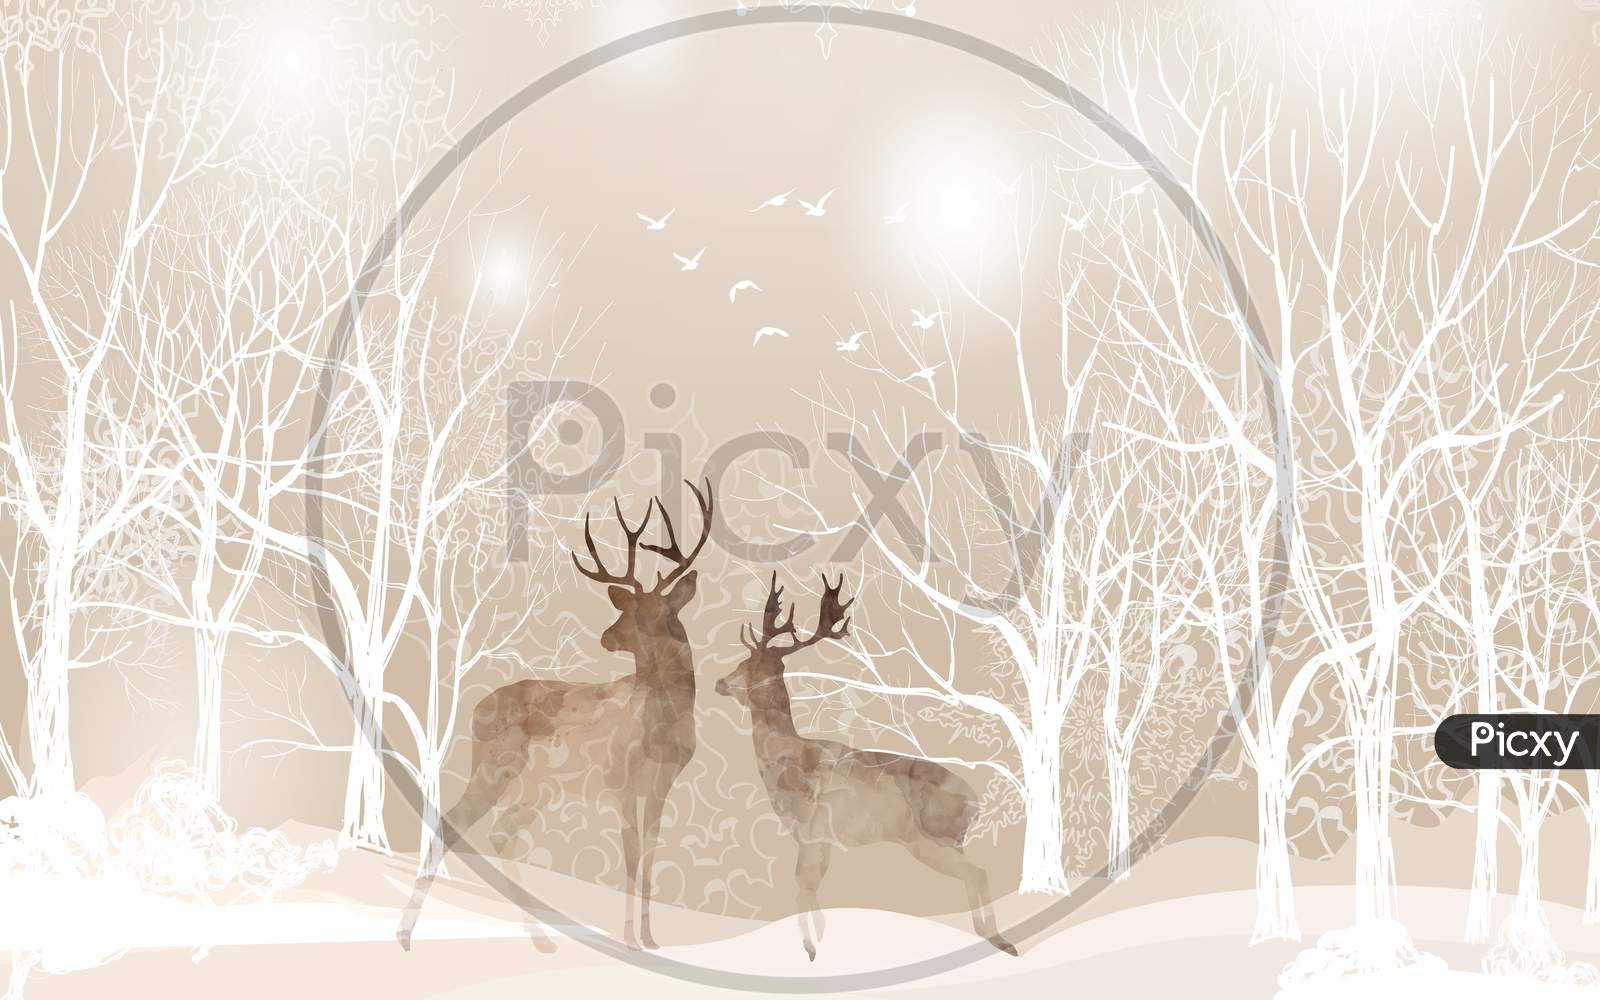 Beautiful White Tree Forest With Dear And Birds Illustration Wallpaper Design.